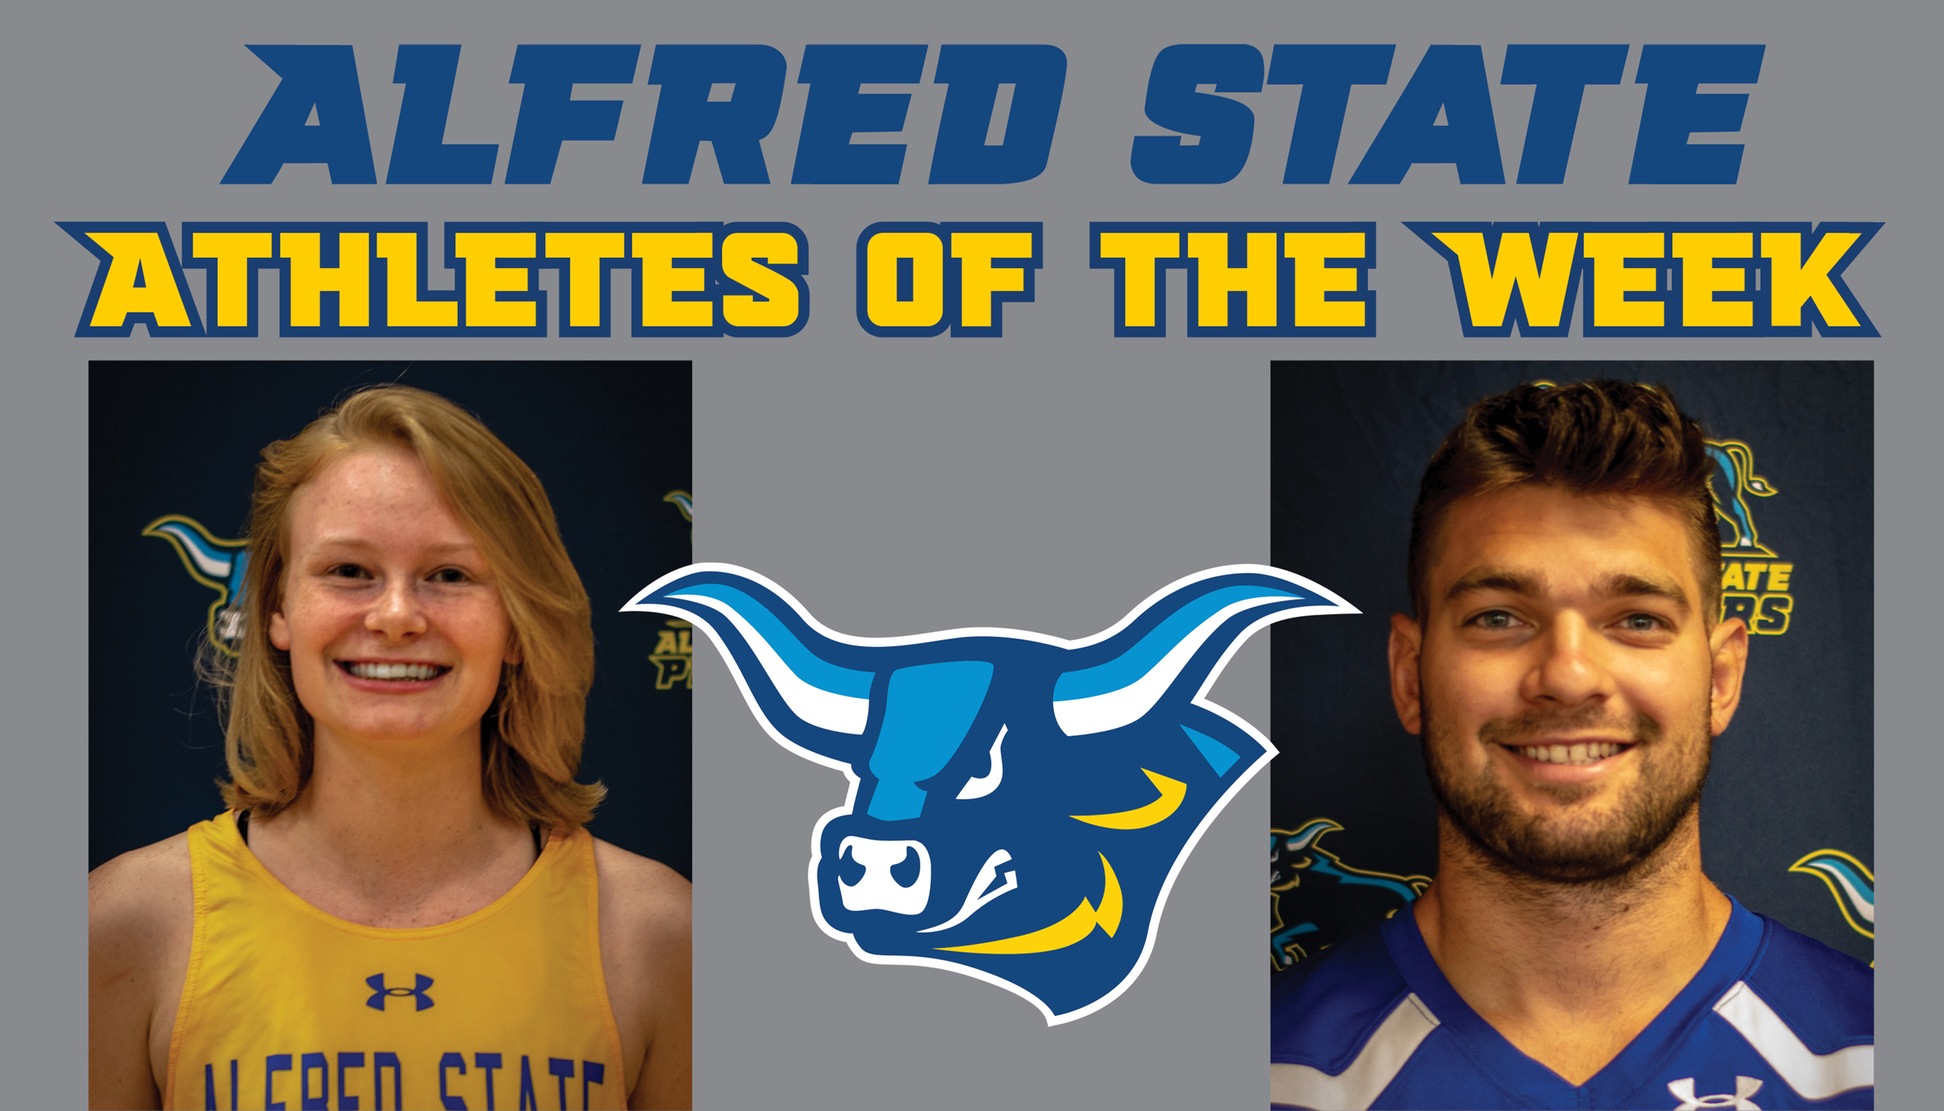 Russell and Lauretti Named Athletes of the Week